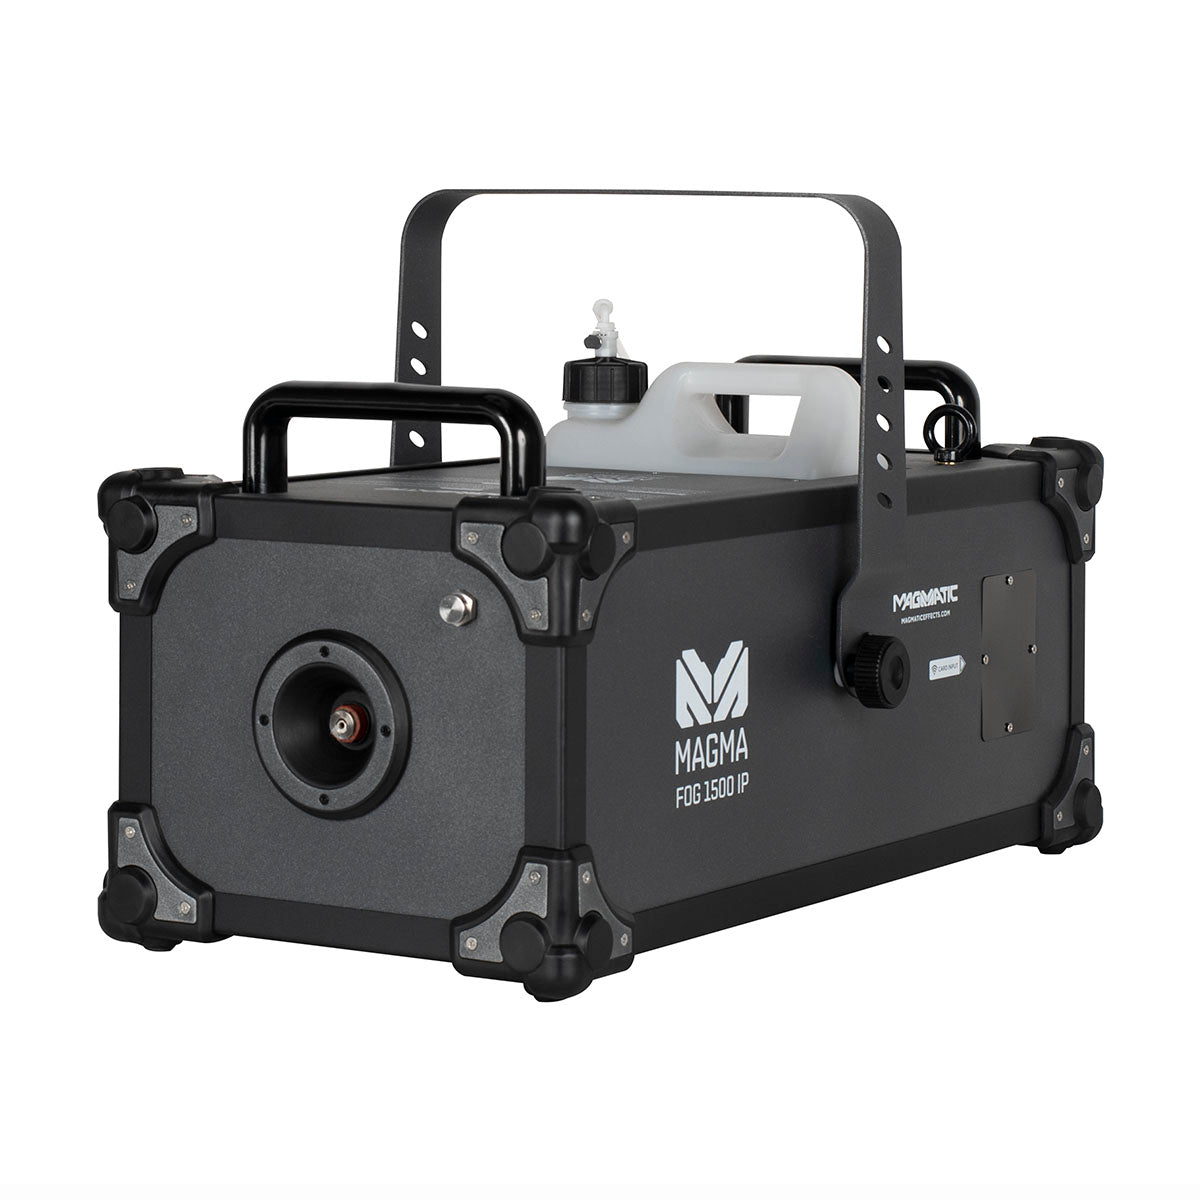 Elation Magma Fog 1500 IP - 1500W Water Based Fog Machine, IP65 Rated, left front view